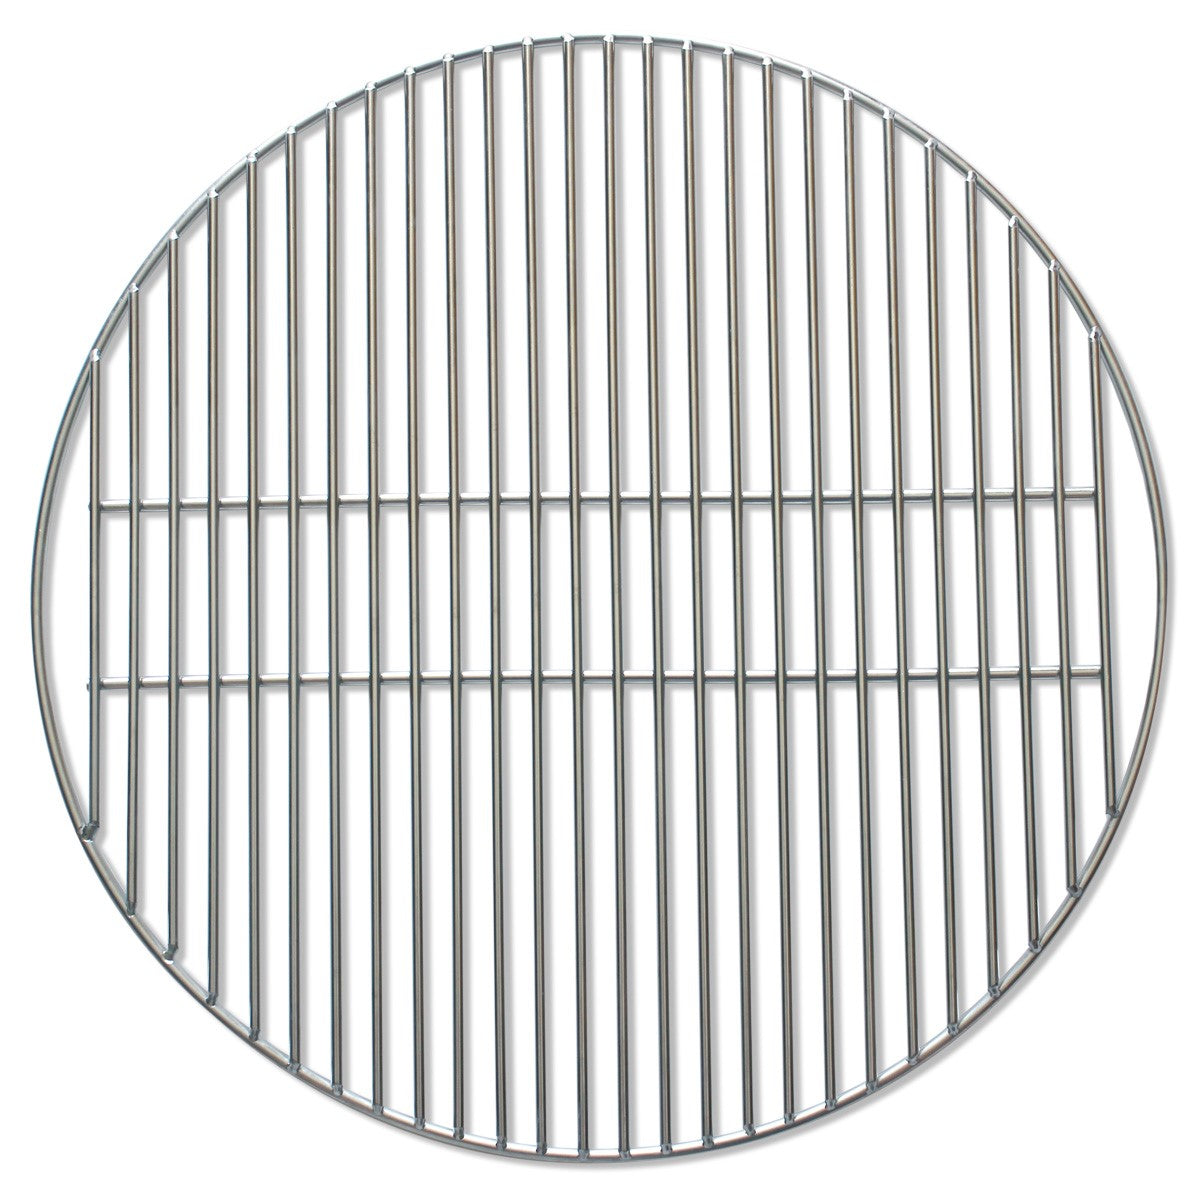 Grill Grate Riser For 20 Grills - Perfect for Larger Pans and Smoky F